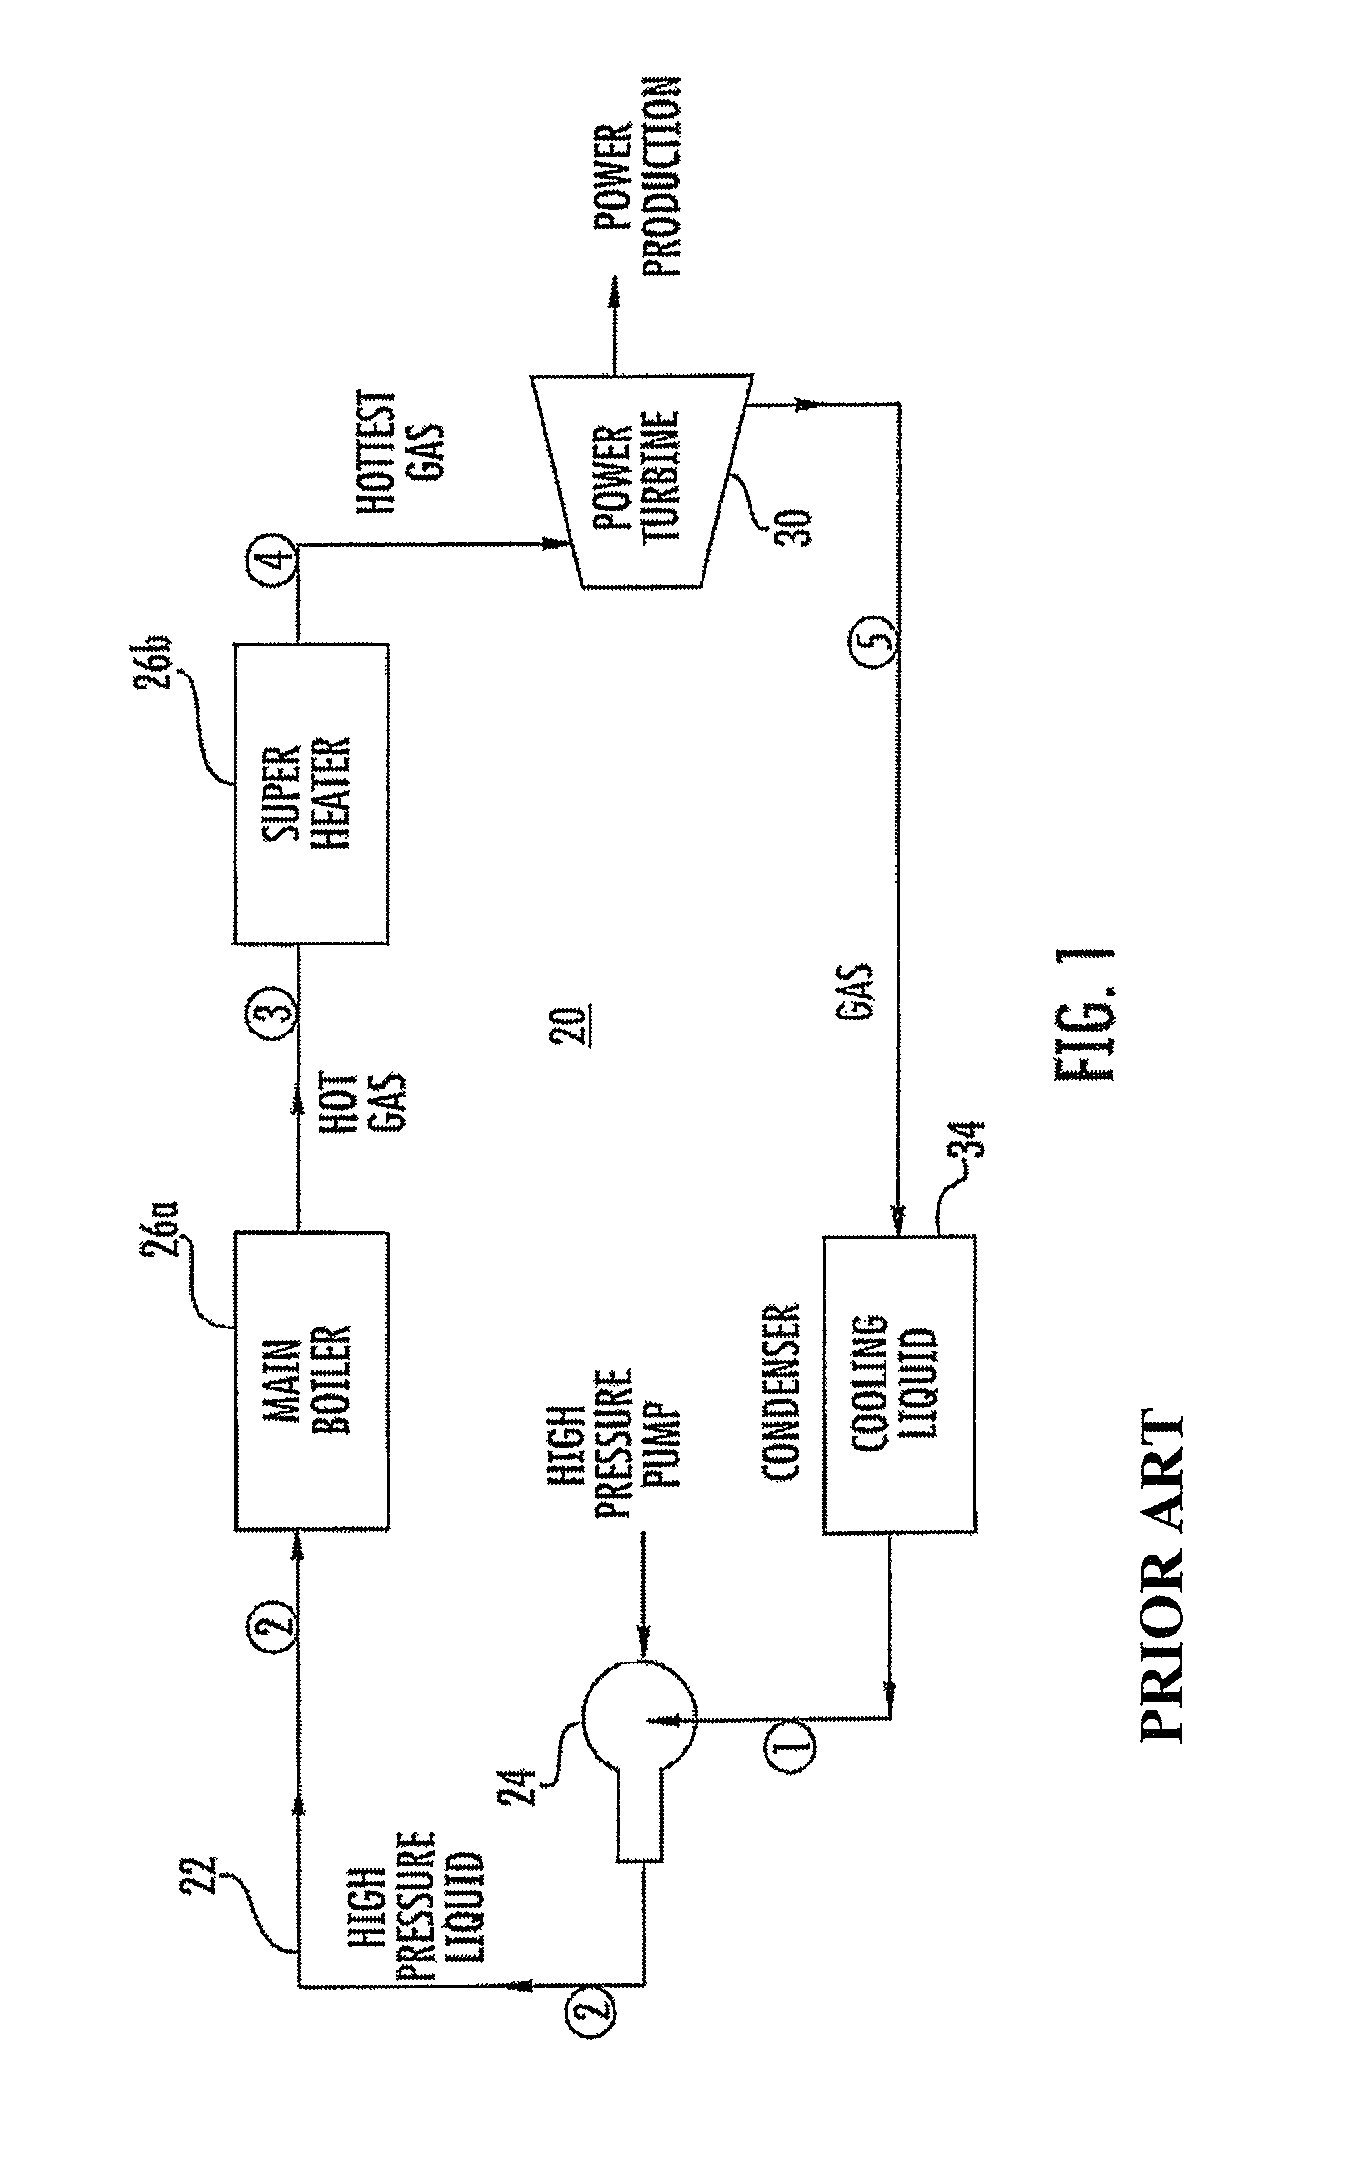 Ultra-high-efficiency engines and corresponding thermodynamic system